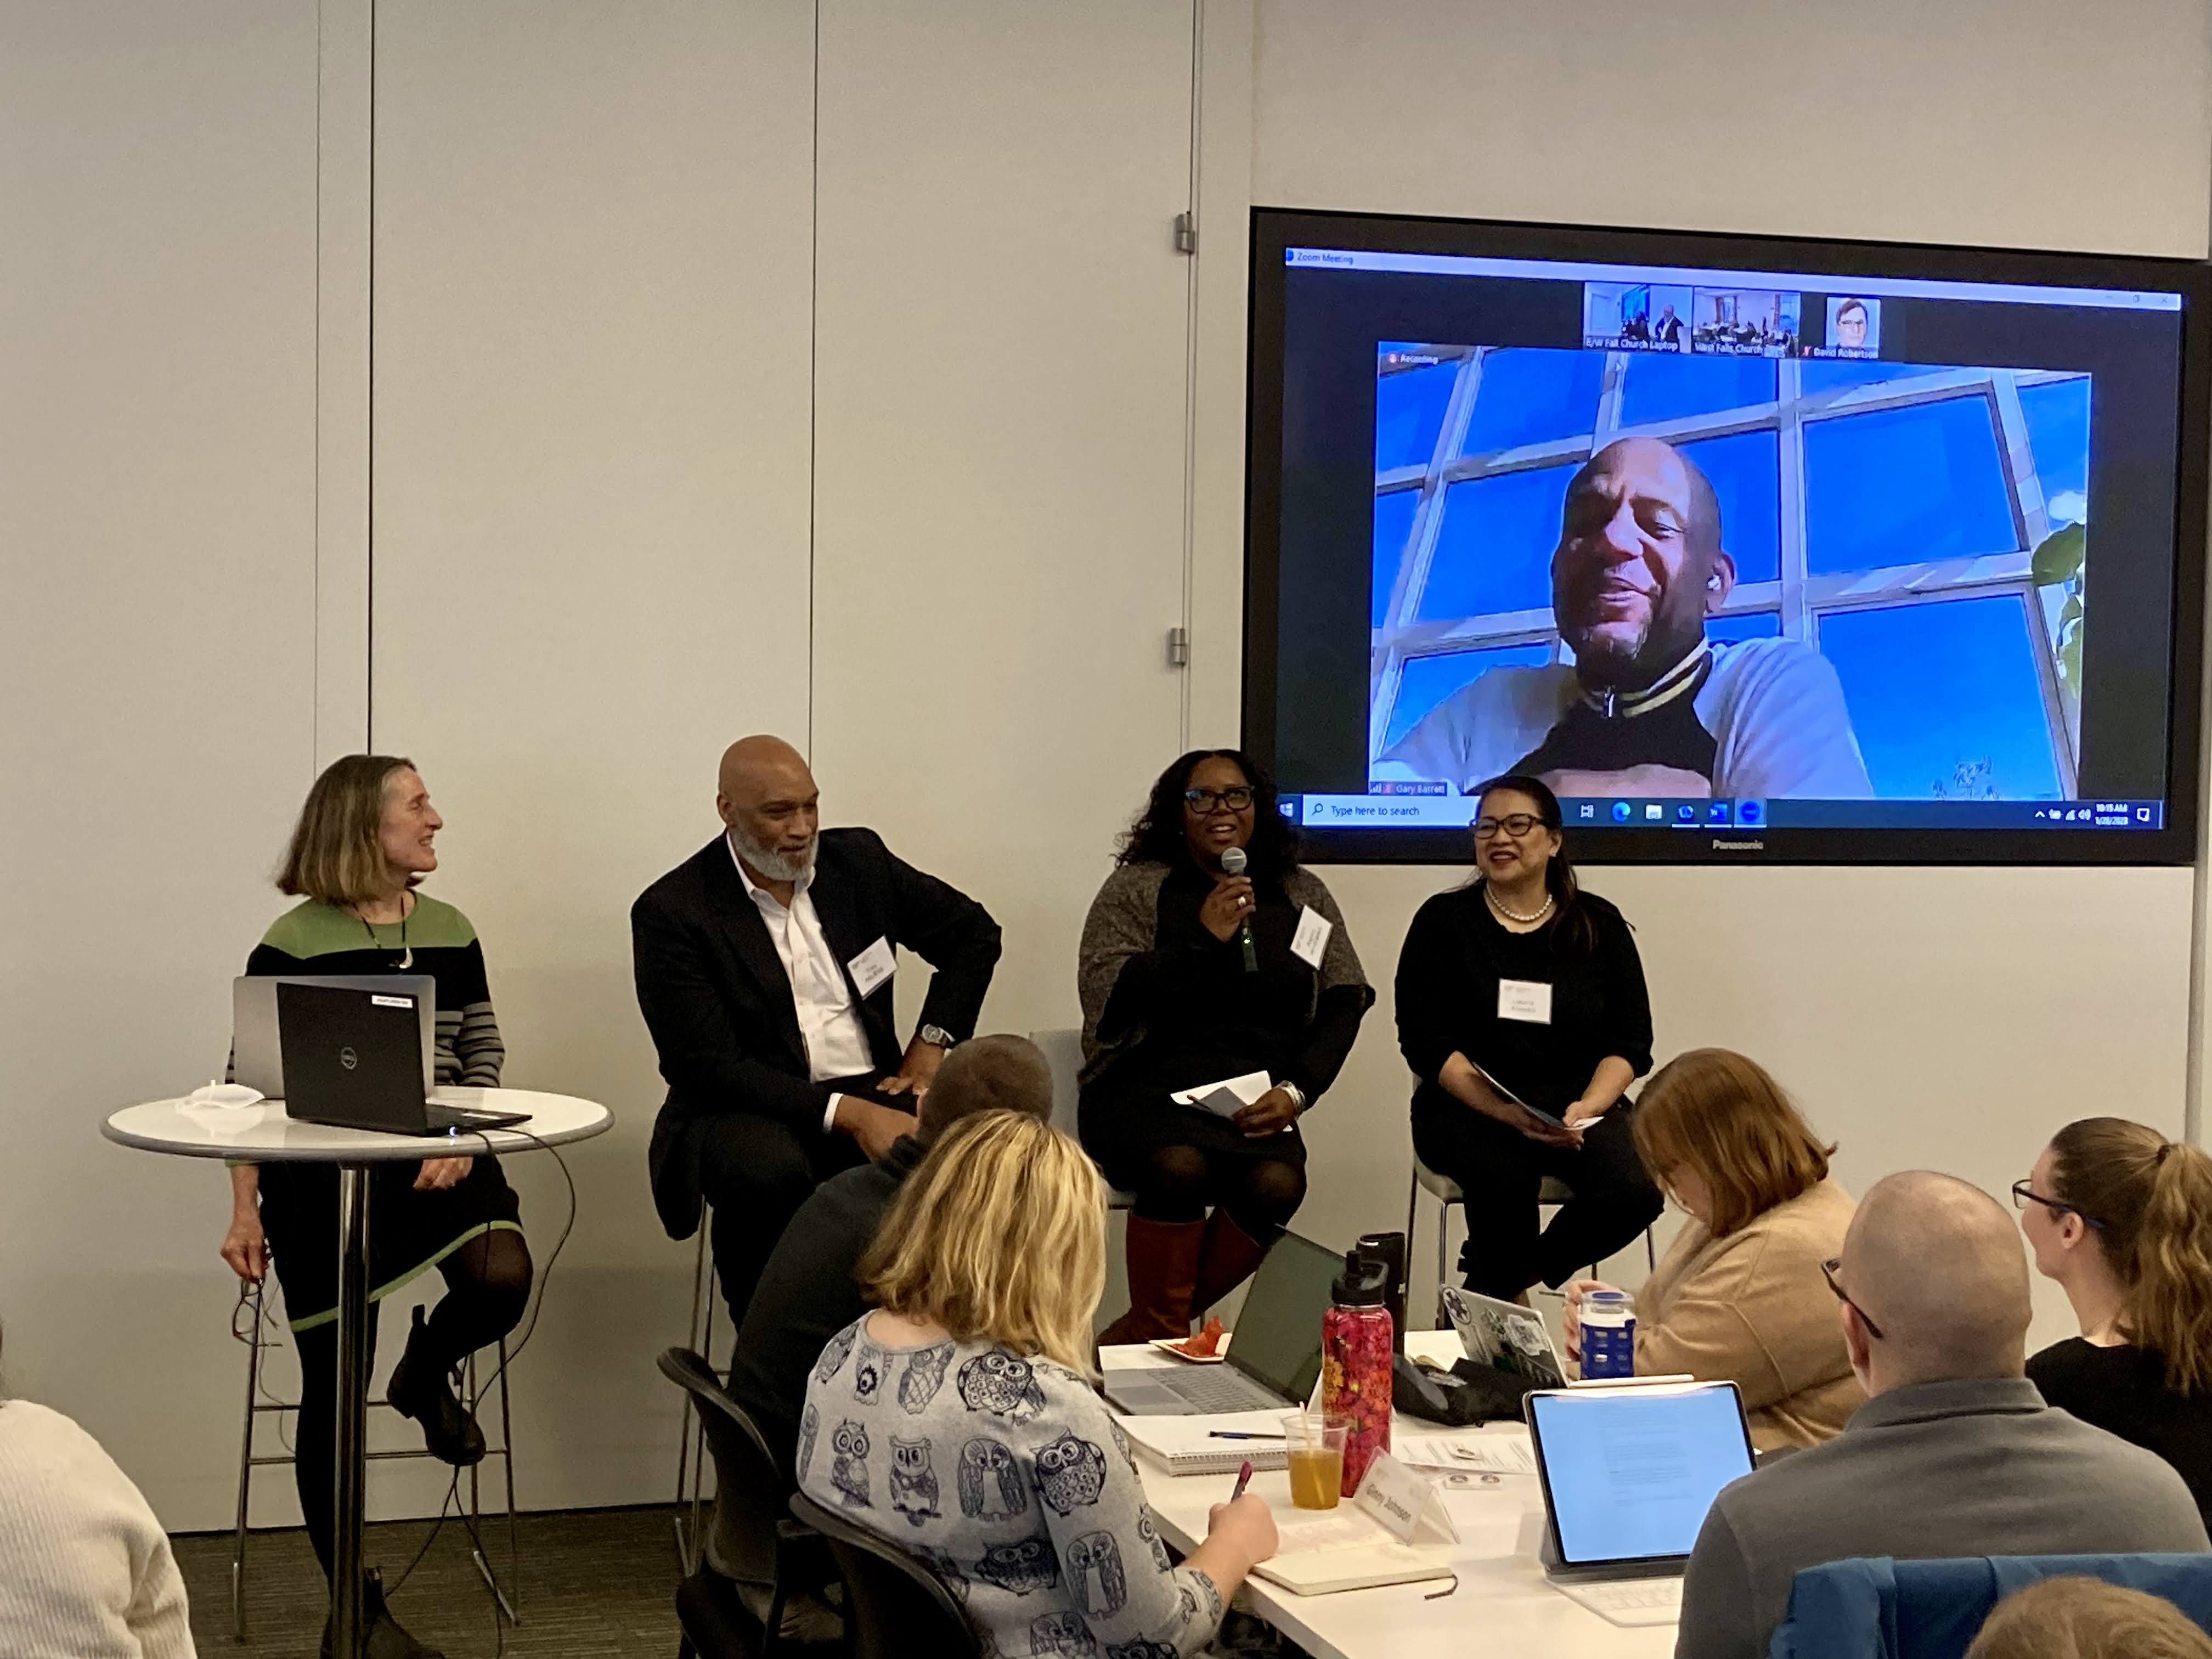 XMNR faculty Gary Barrett and Holly Wise co-host a panel of international development experts including Tim McRae, Aleta Williams, and Laura Alonzo. Photo: Amy Hubbard 